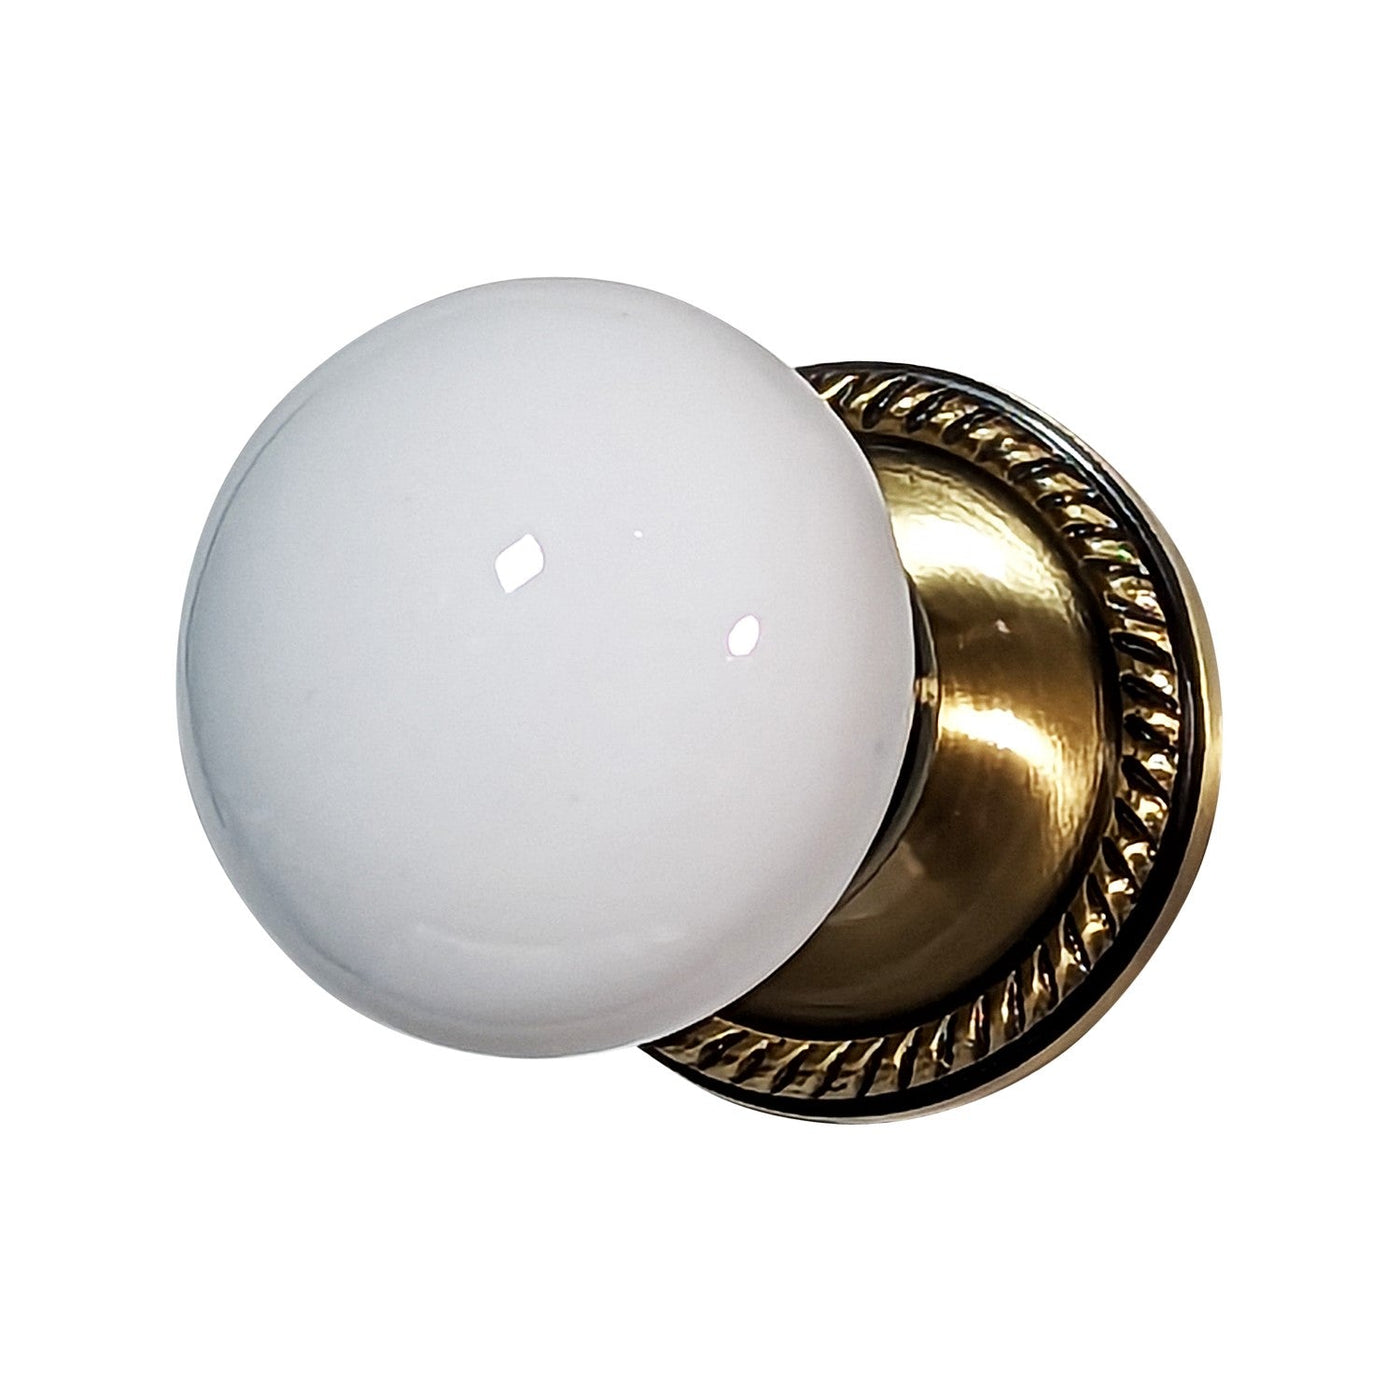 Georgian Roped Rosette Door Set with White Porcelain Door Knobs (Several Finishes Available)